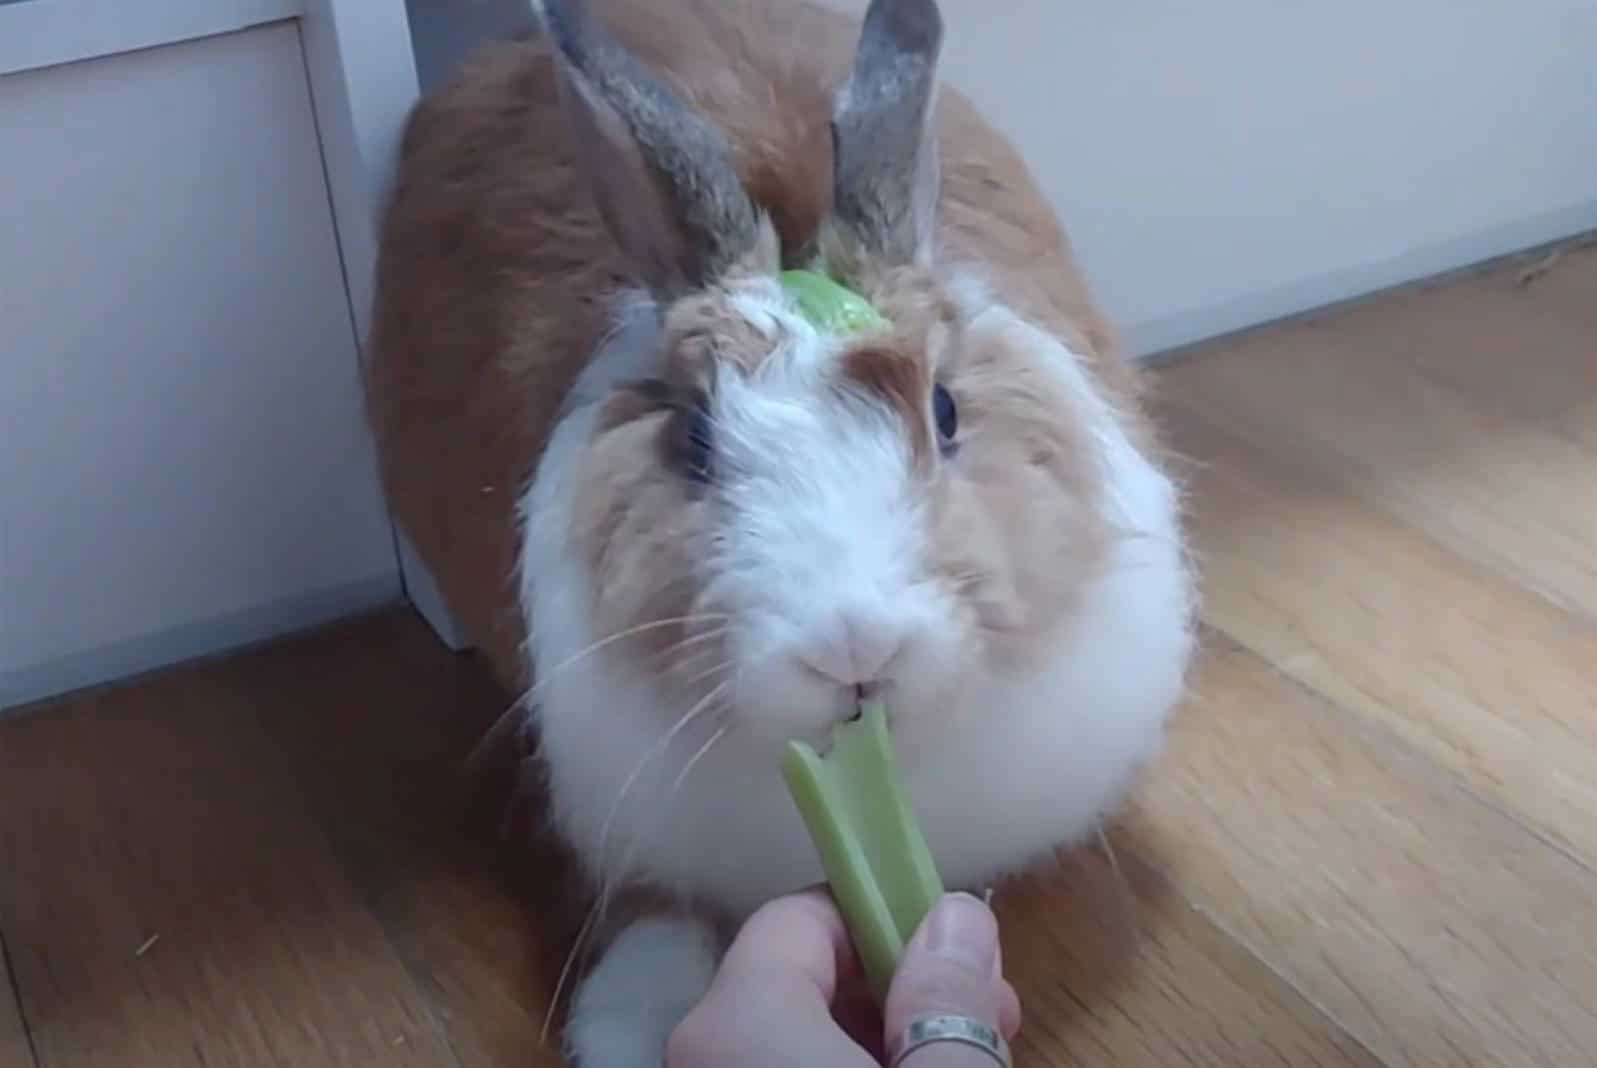 can rabbits eat celery